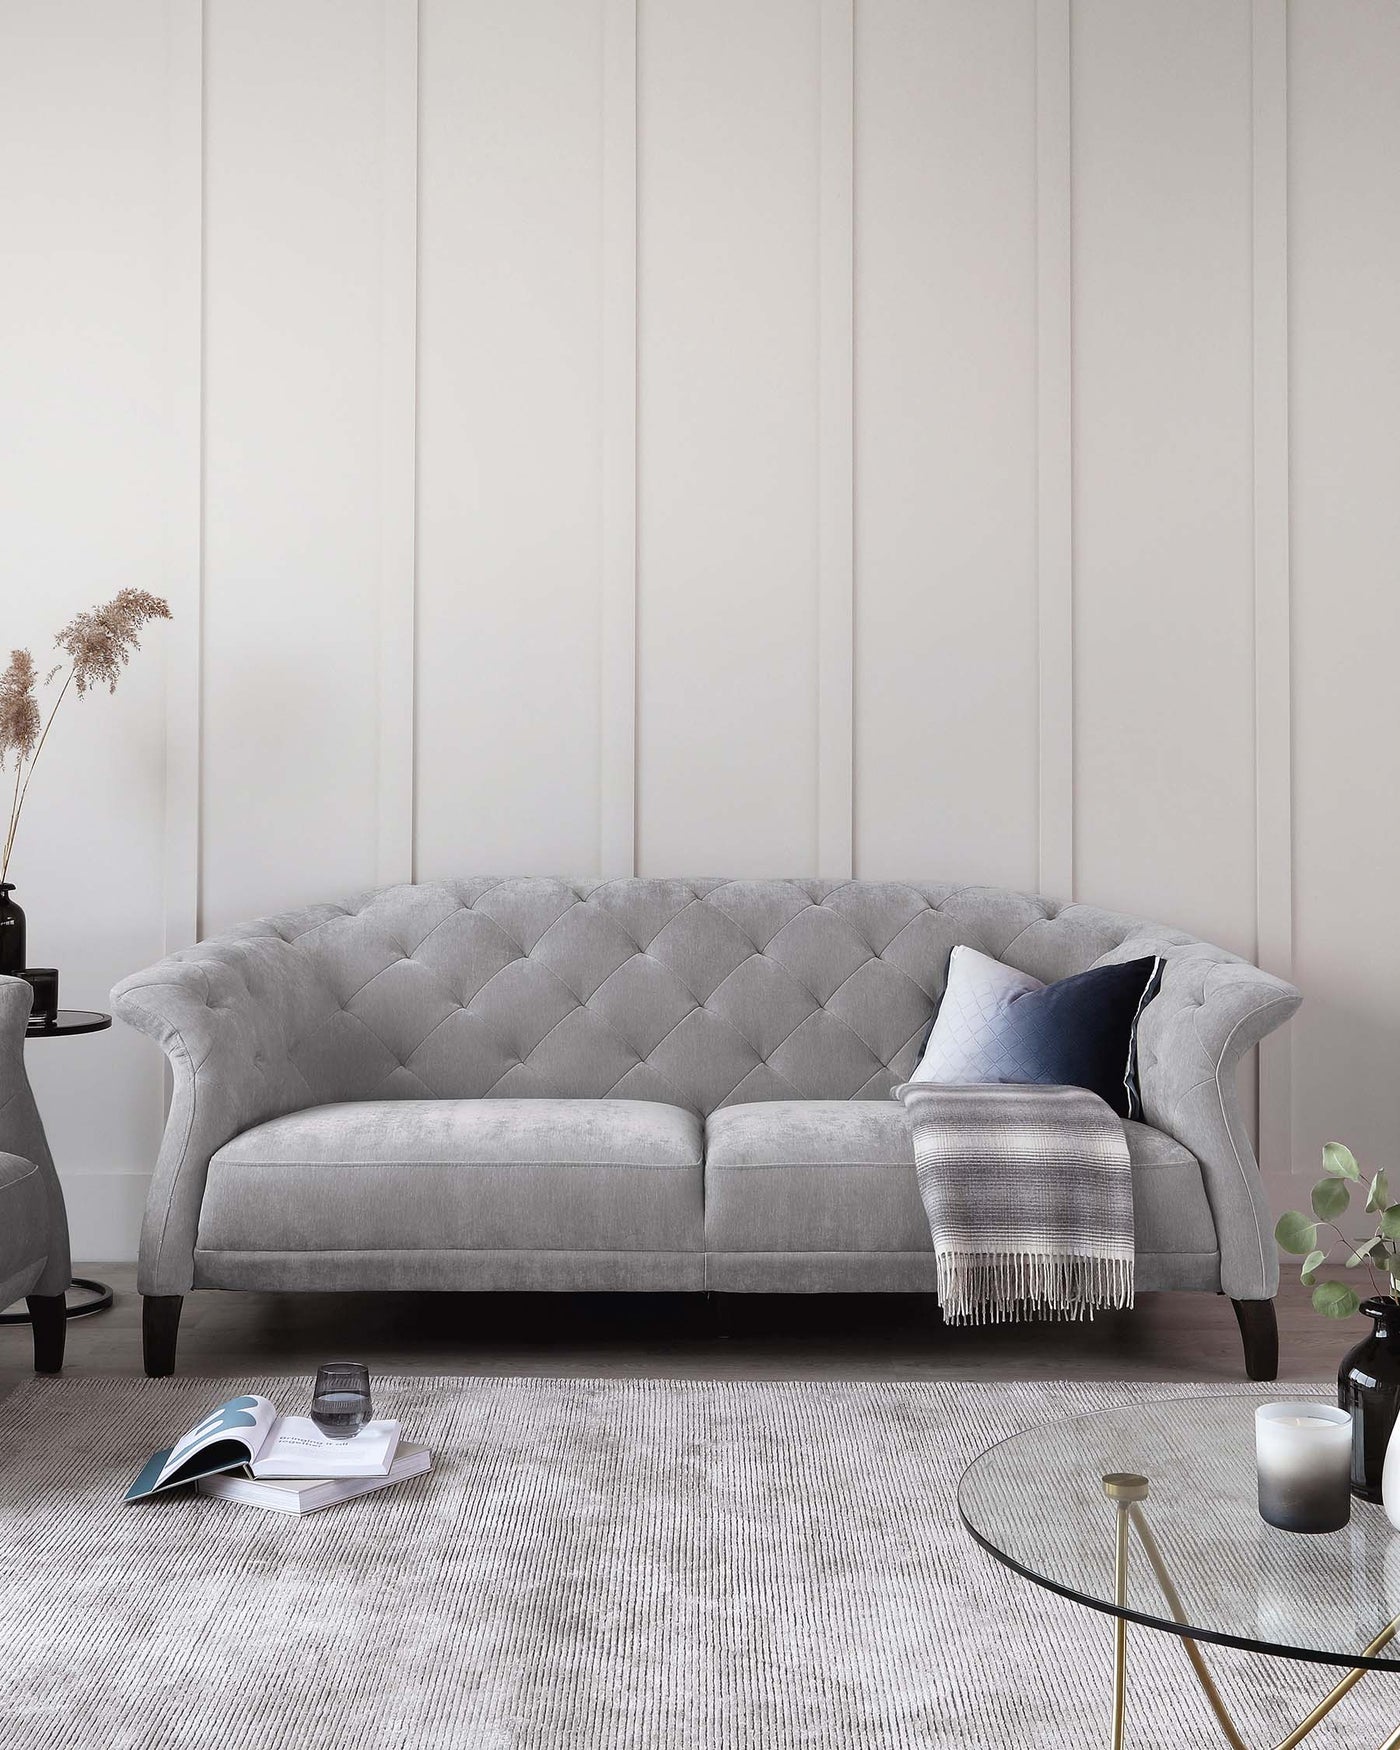 Elegant light grey tufted chesterfield sofa with accent cushions and a fringed throw blanket, flanked by round black side tables with vases and books, set on a textured white area rug, next to a glass-top coffee table with gold accents.